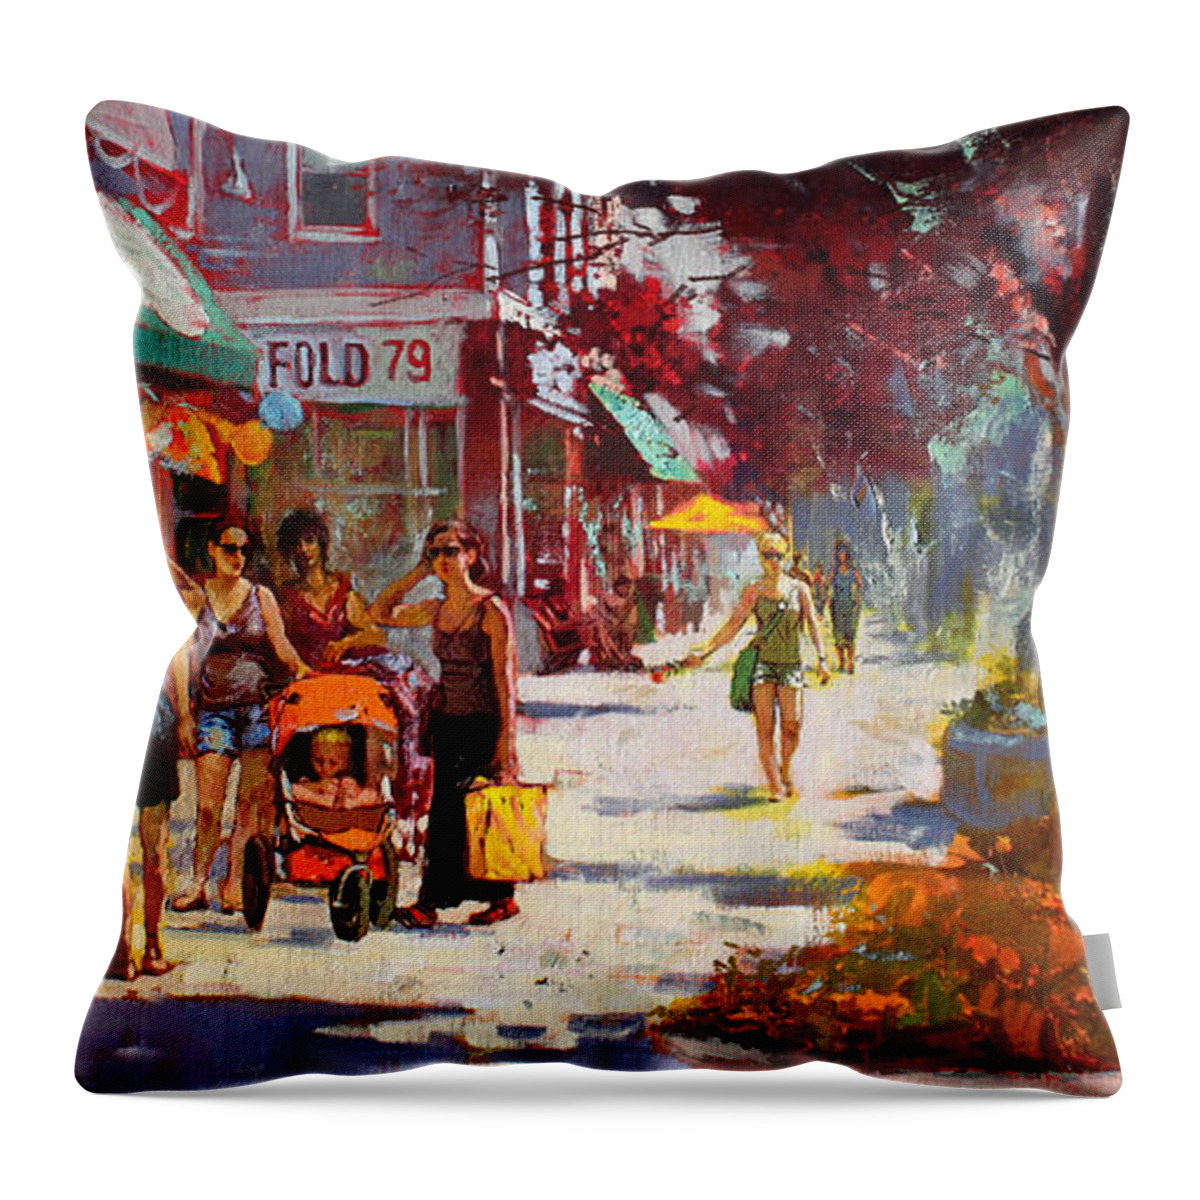 Landscape Throw Pillow featuring the painting Small Talk in Elmwood Ave by Ylli Haruni